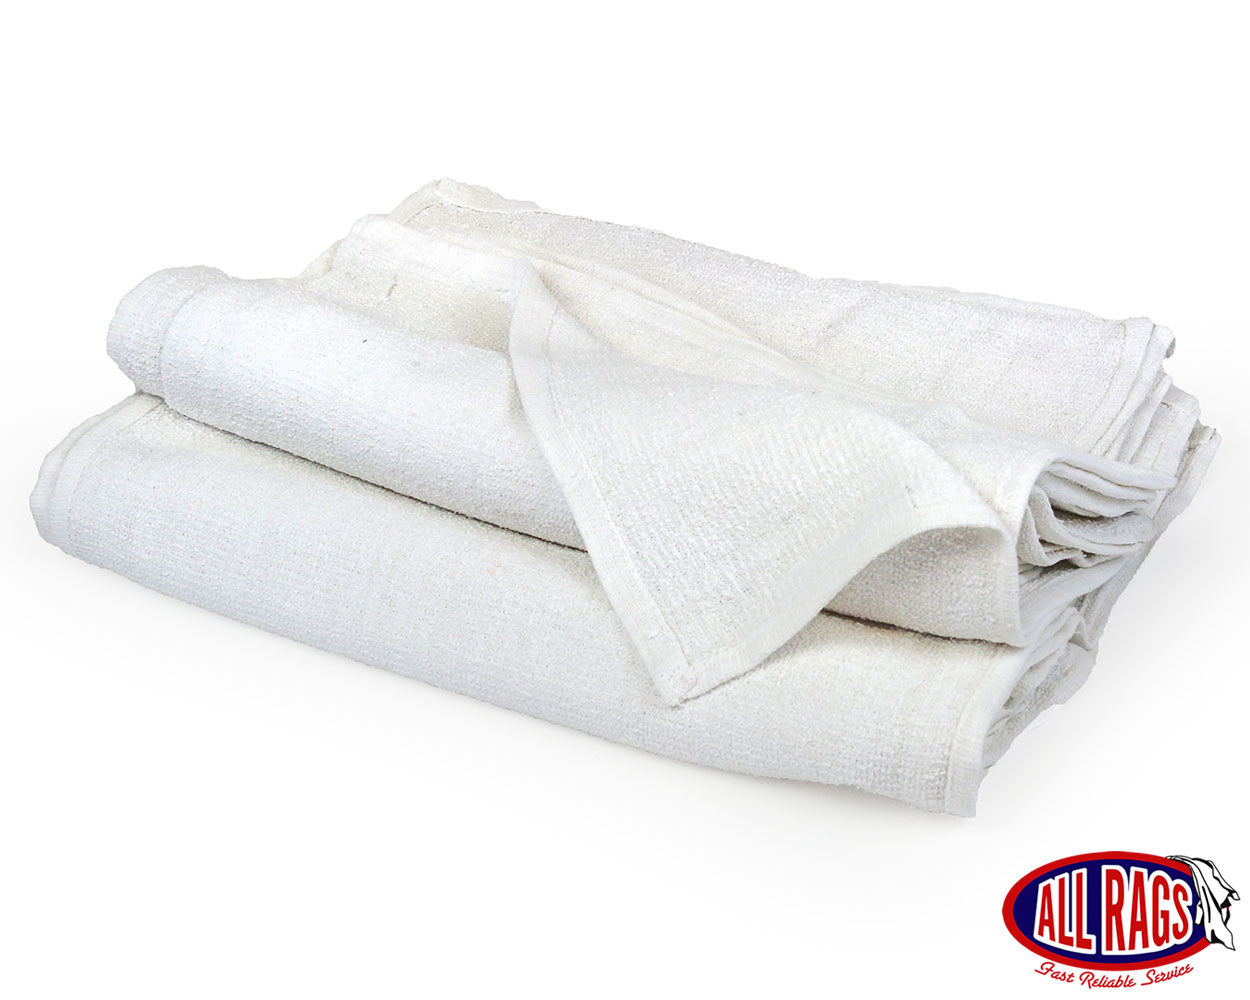 Corporate Hills Cotton Terry Towels Cleaning Cloths, 100% Cotton Terry Cloth Bar Rags White Bar Towels, Multipurpose High Absorbent Terry Towels